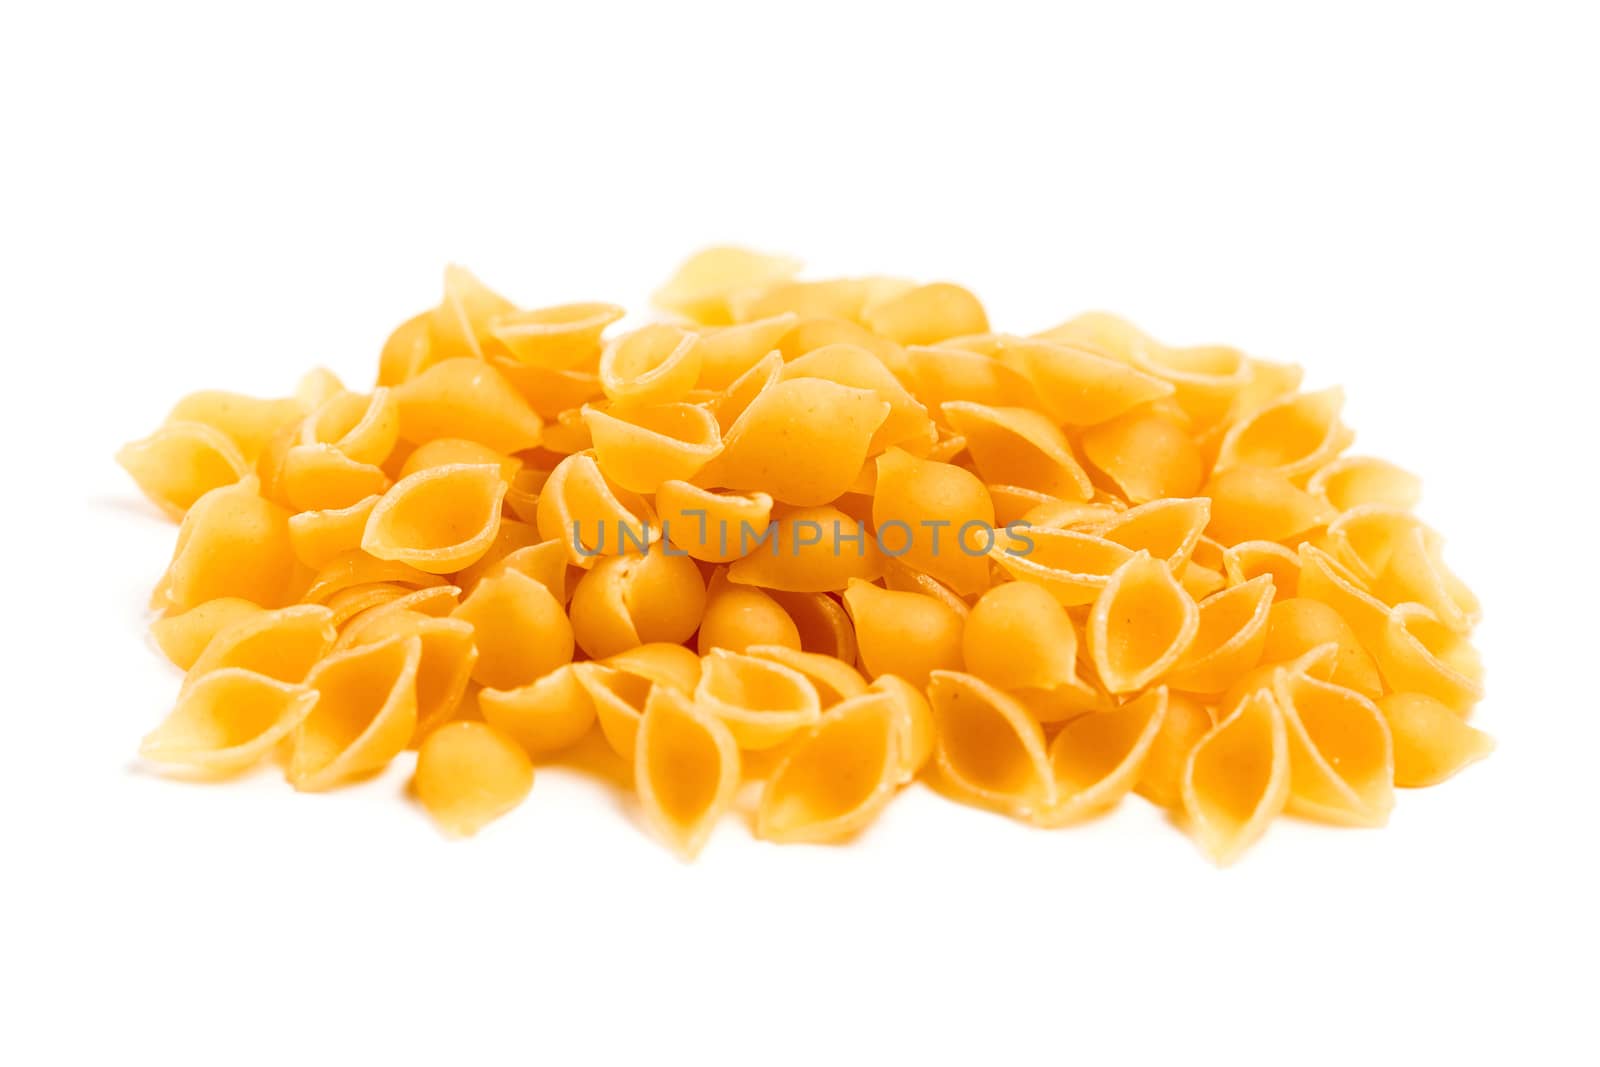 Raw Italian pasta in a heap on the table isolated on white background.